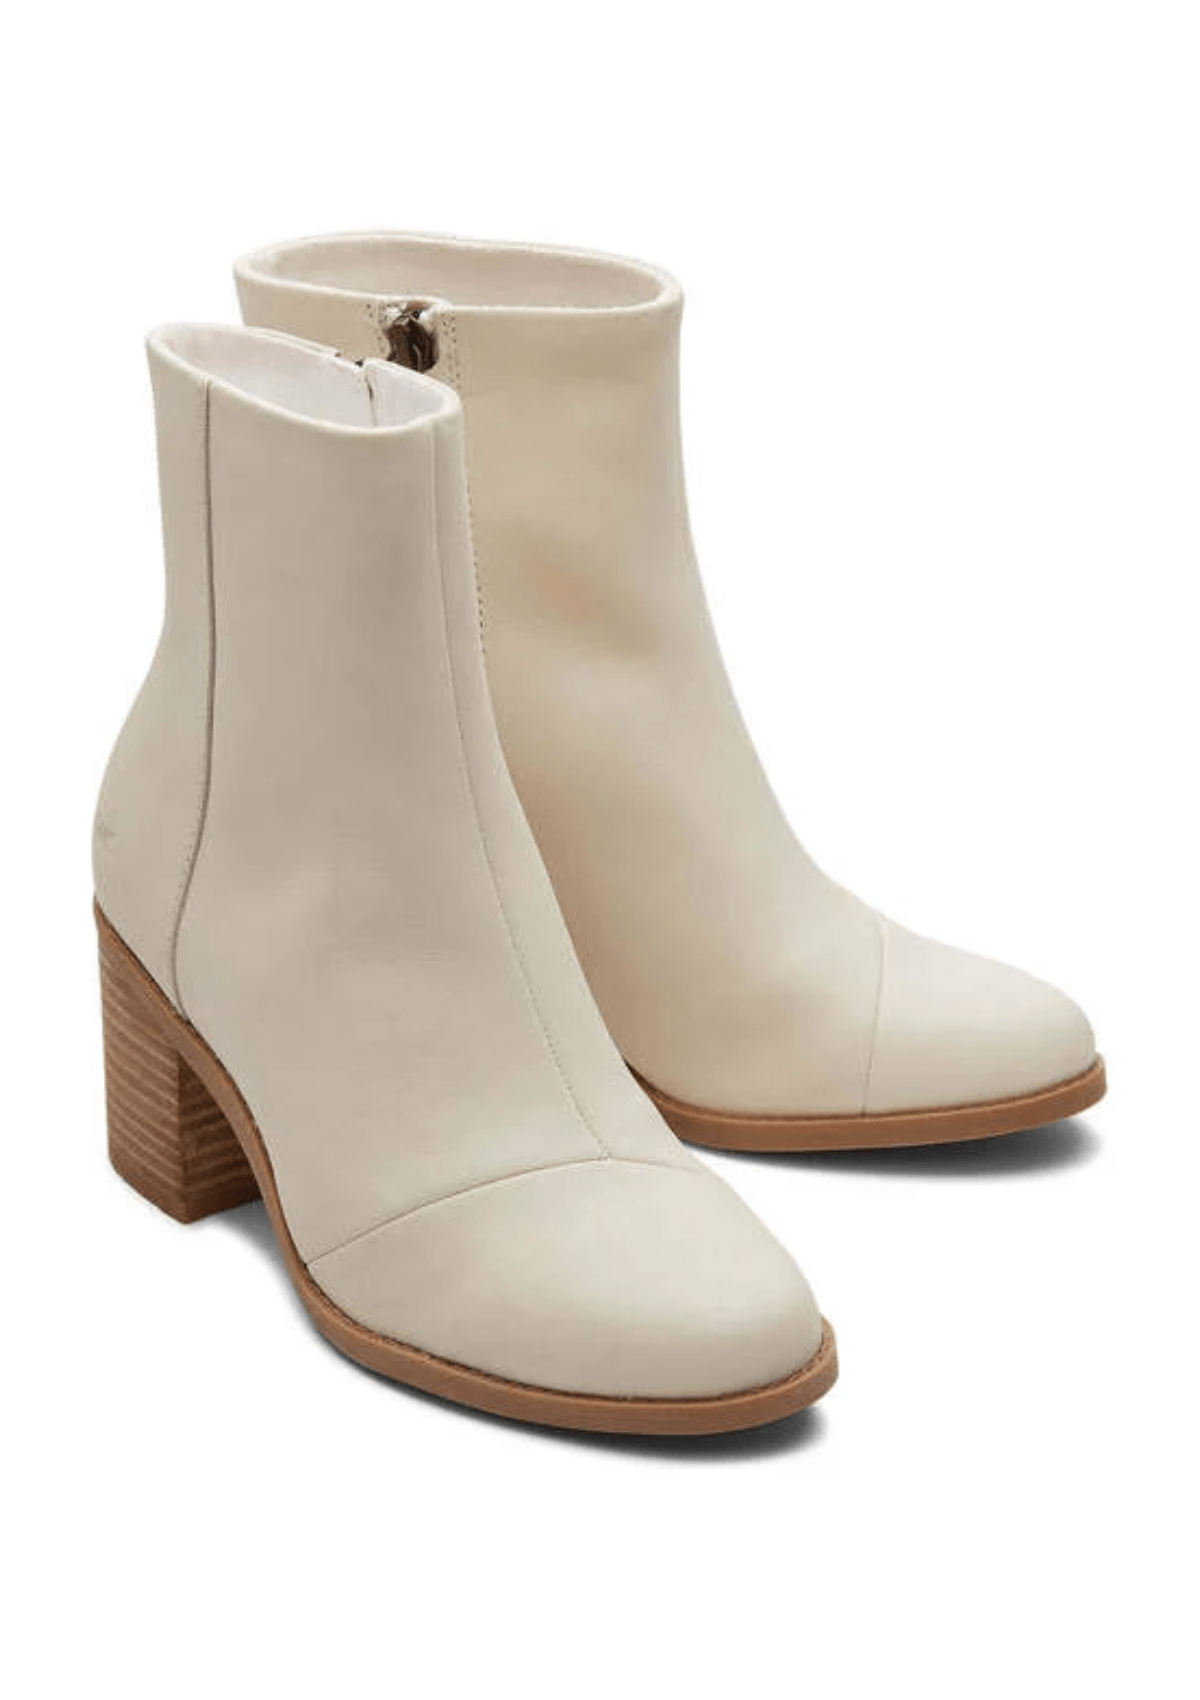 Evelyn Bootie with Stacked Heel, Light Sand Leather -Toms- Ruby Jane-